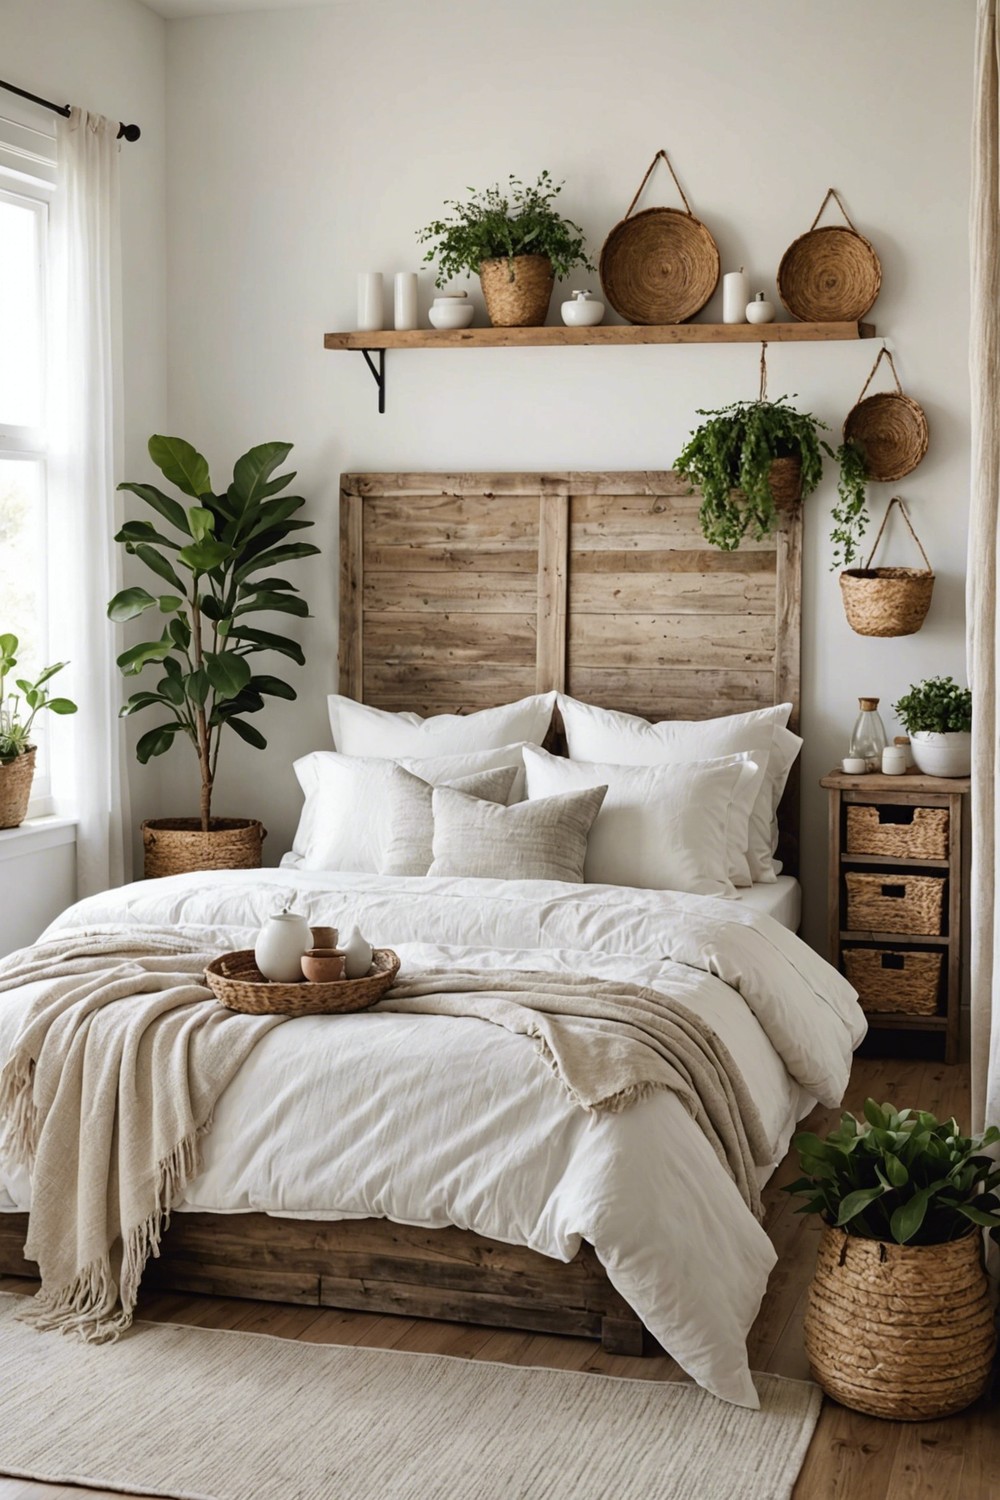 Cozy Retreat: Plush White Bedding with Natural Accents